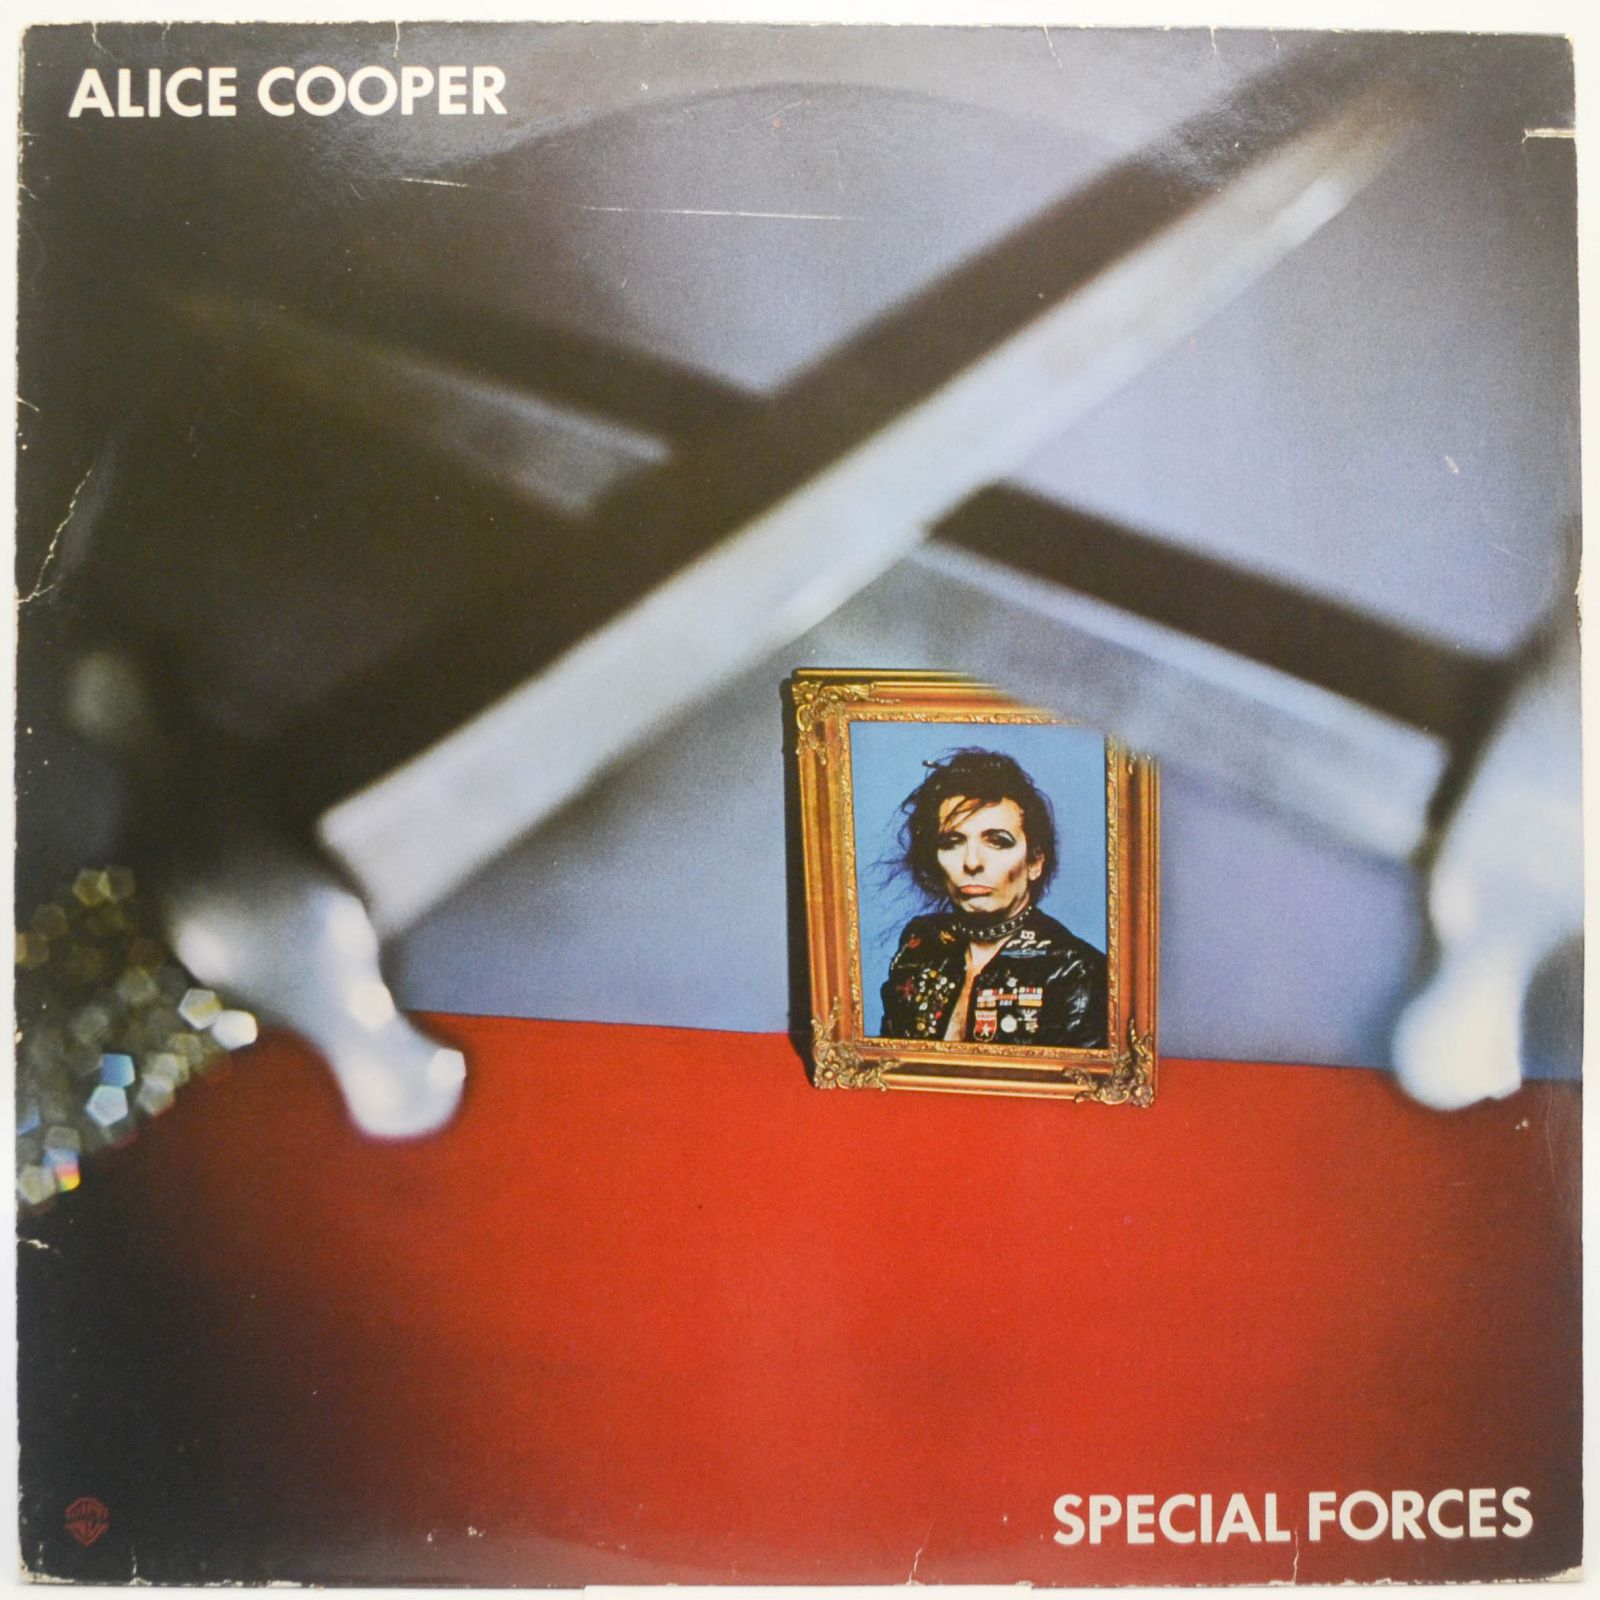 Alice Cooper — Special Forces, 1981